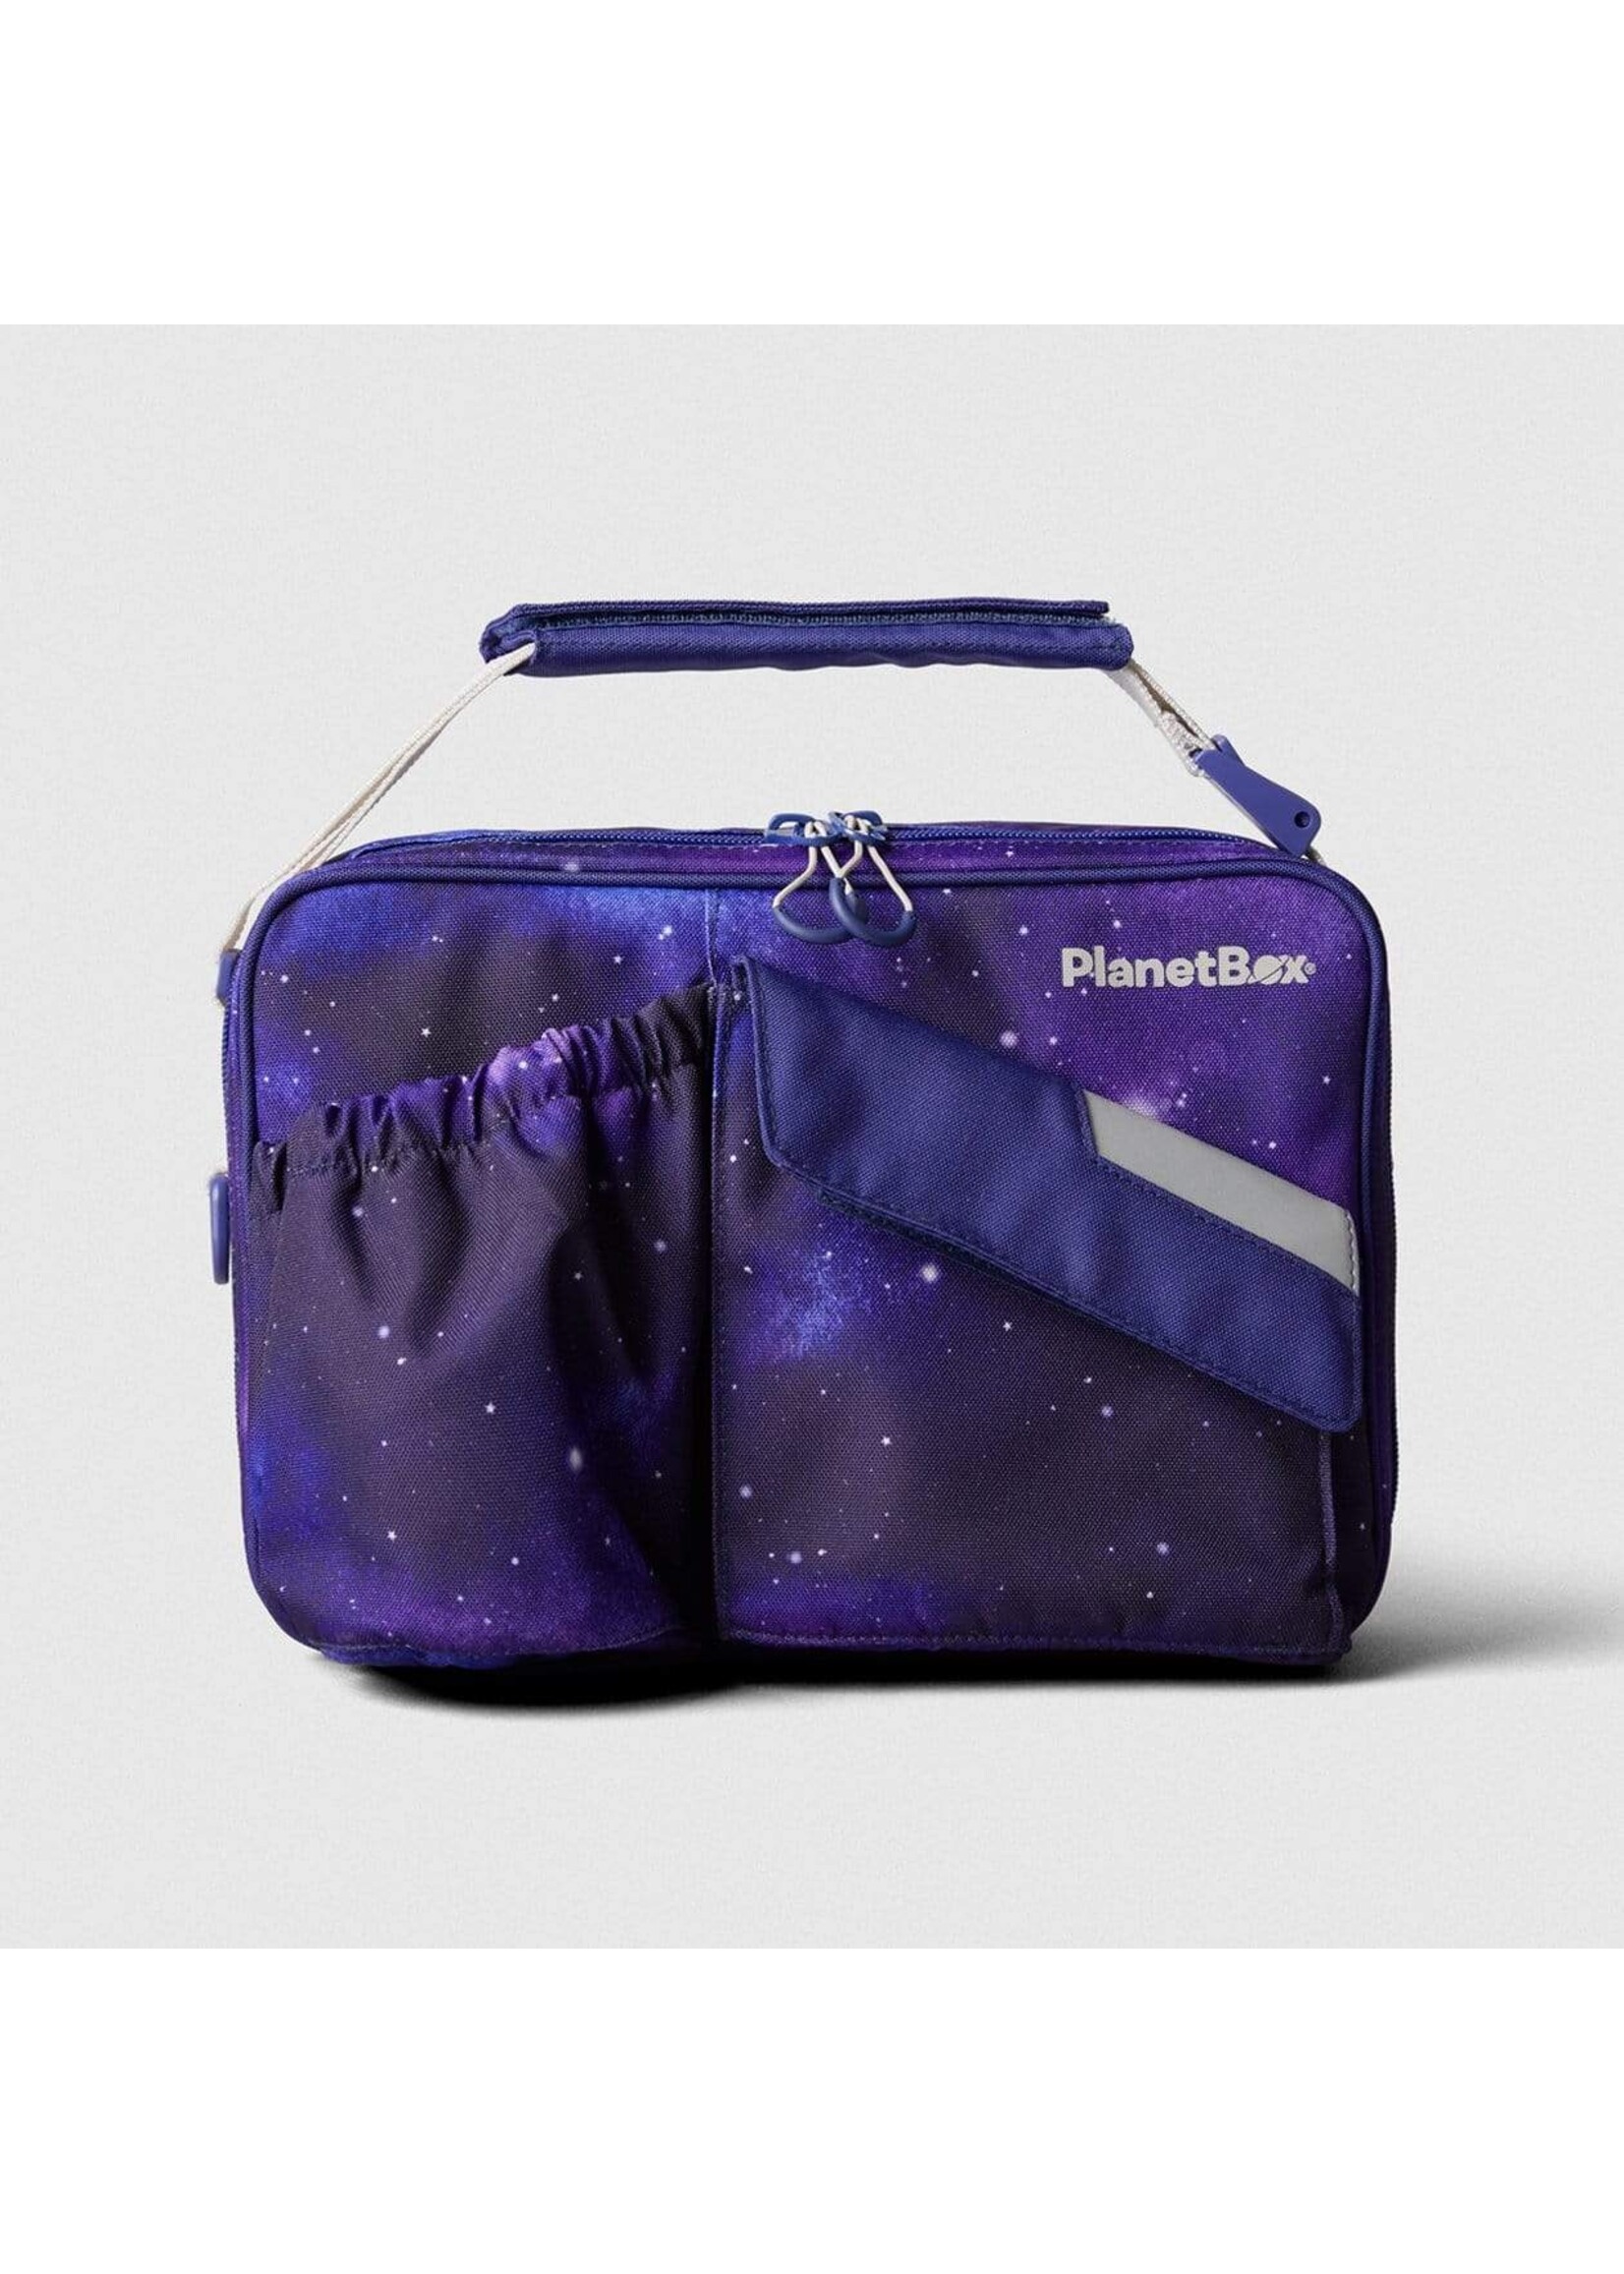 PlanetBox Stainless Steel Lunchbox Set - Stardust